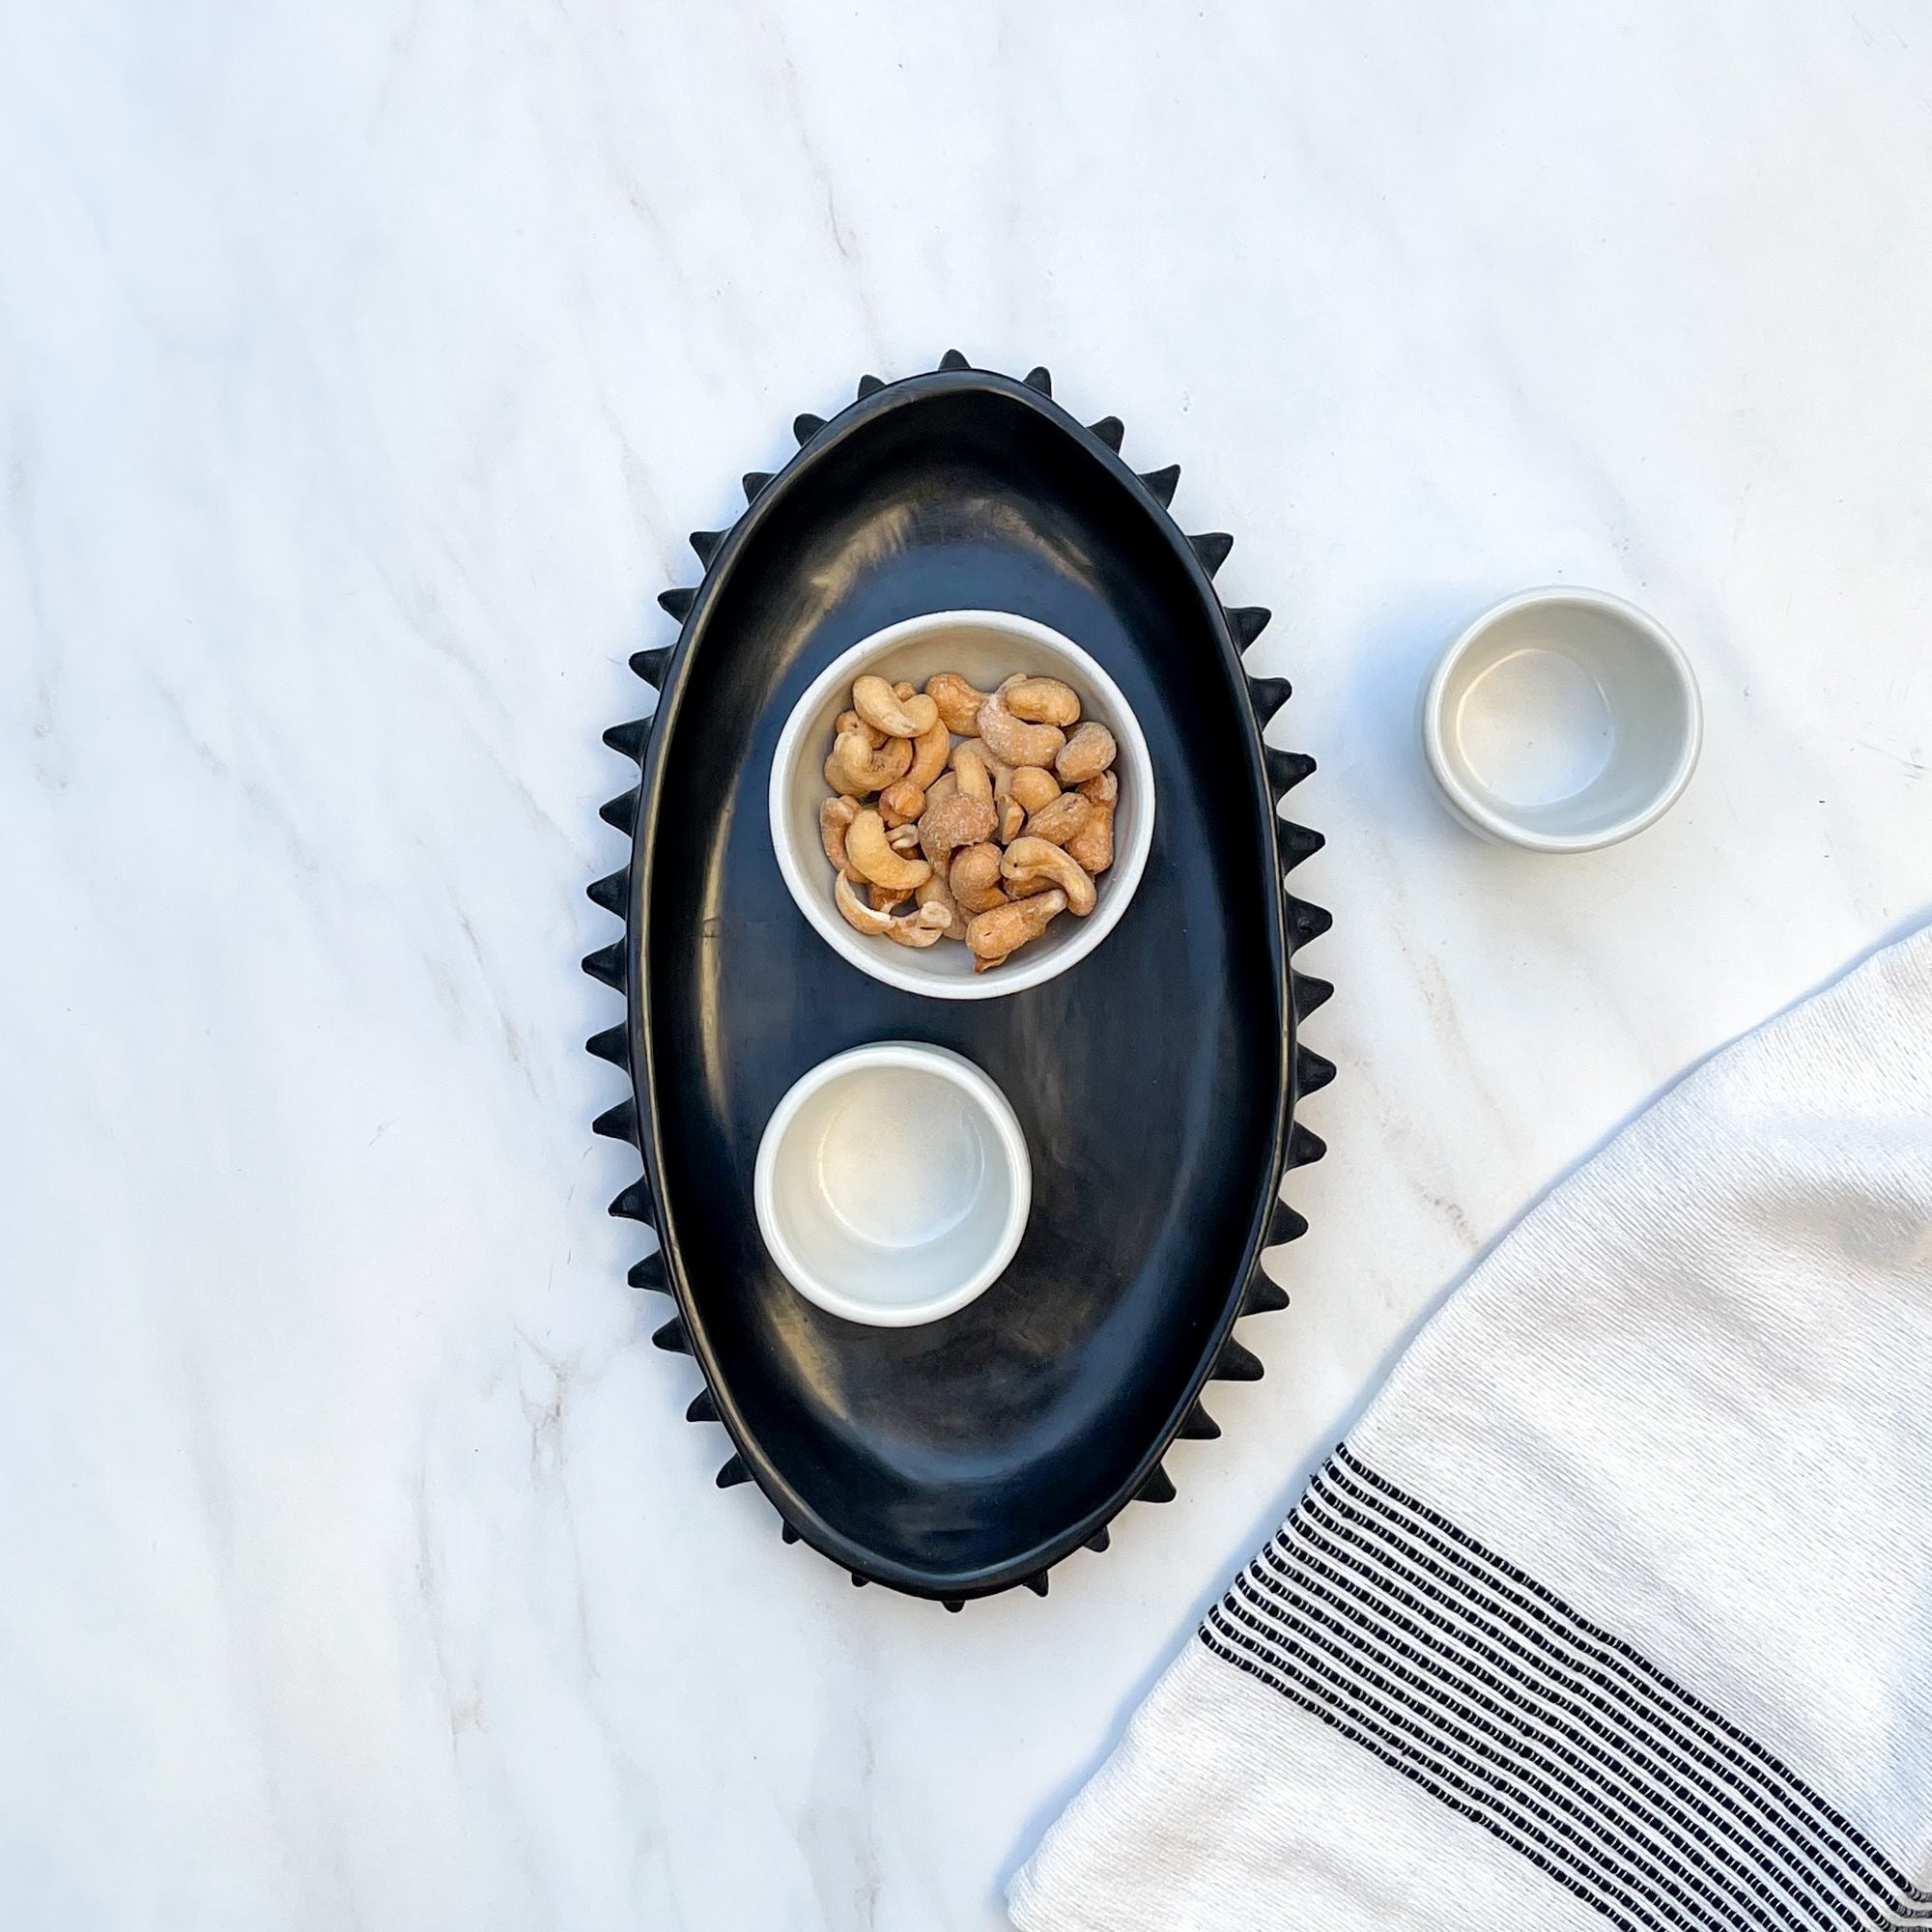 A Oaxaca black clay tray with a spiky design holding a mezcal copita, and a bowl of nuts. A cream hand towel is alongside.